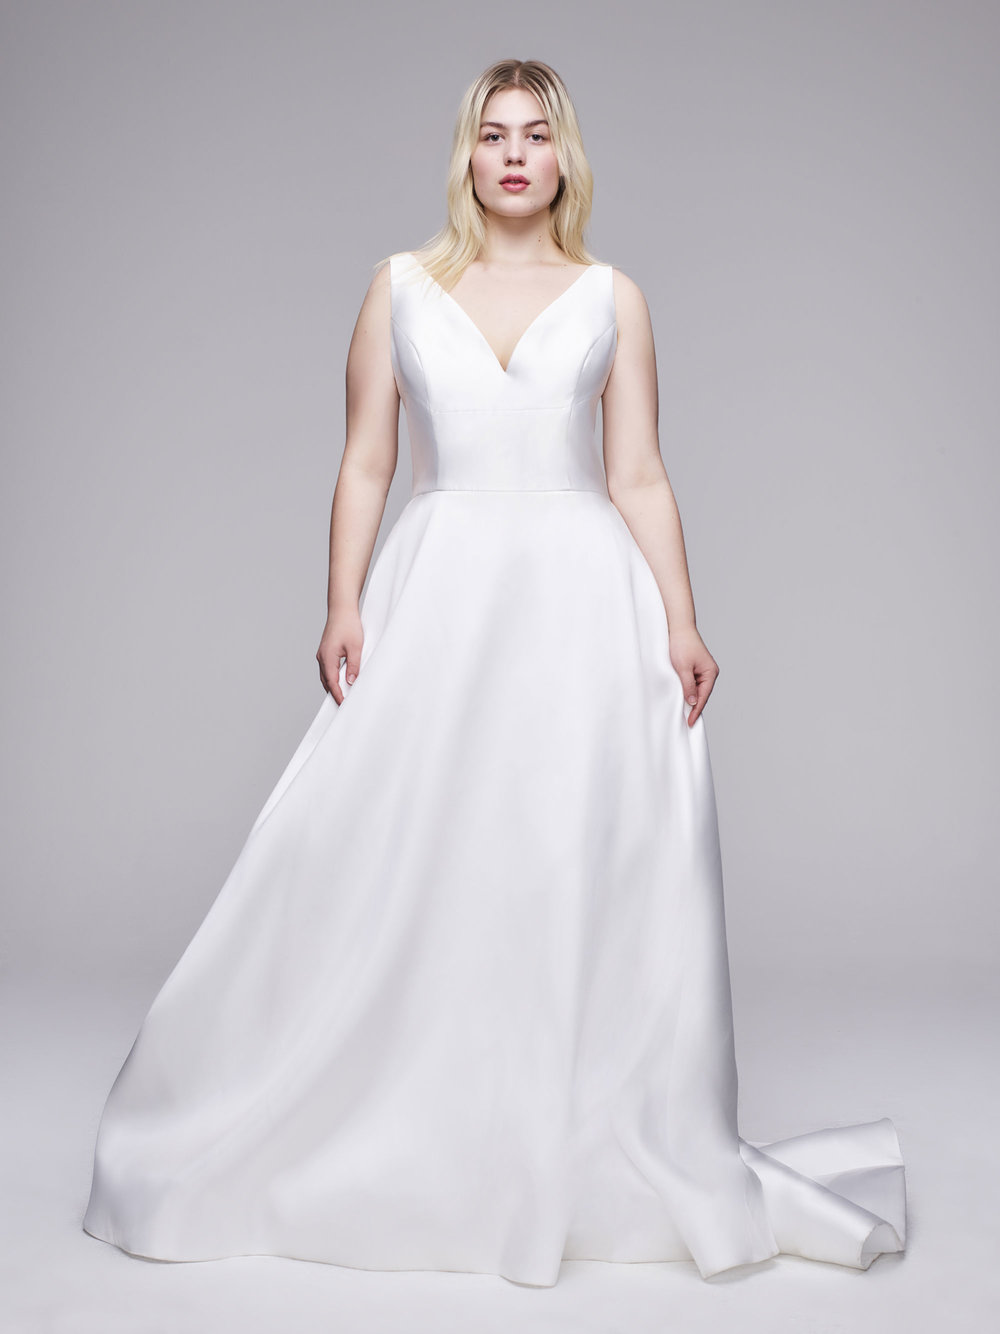 The Raquel Plus Size wedding gown from Curve Couture by Anne Barge